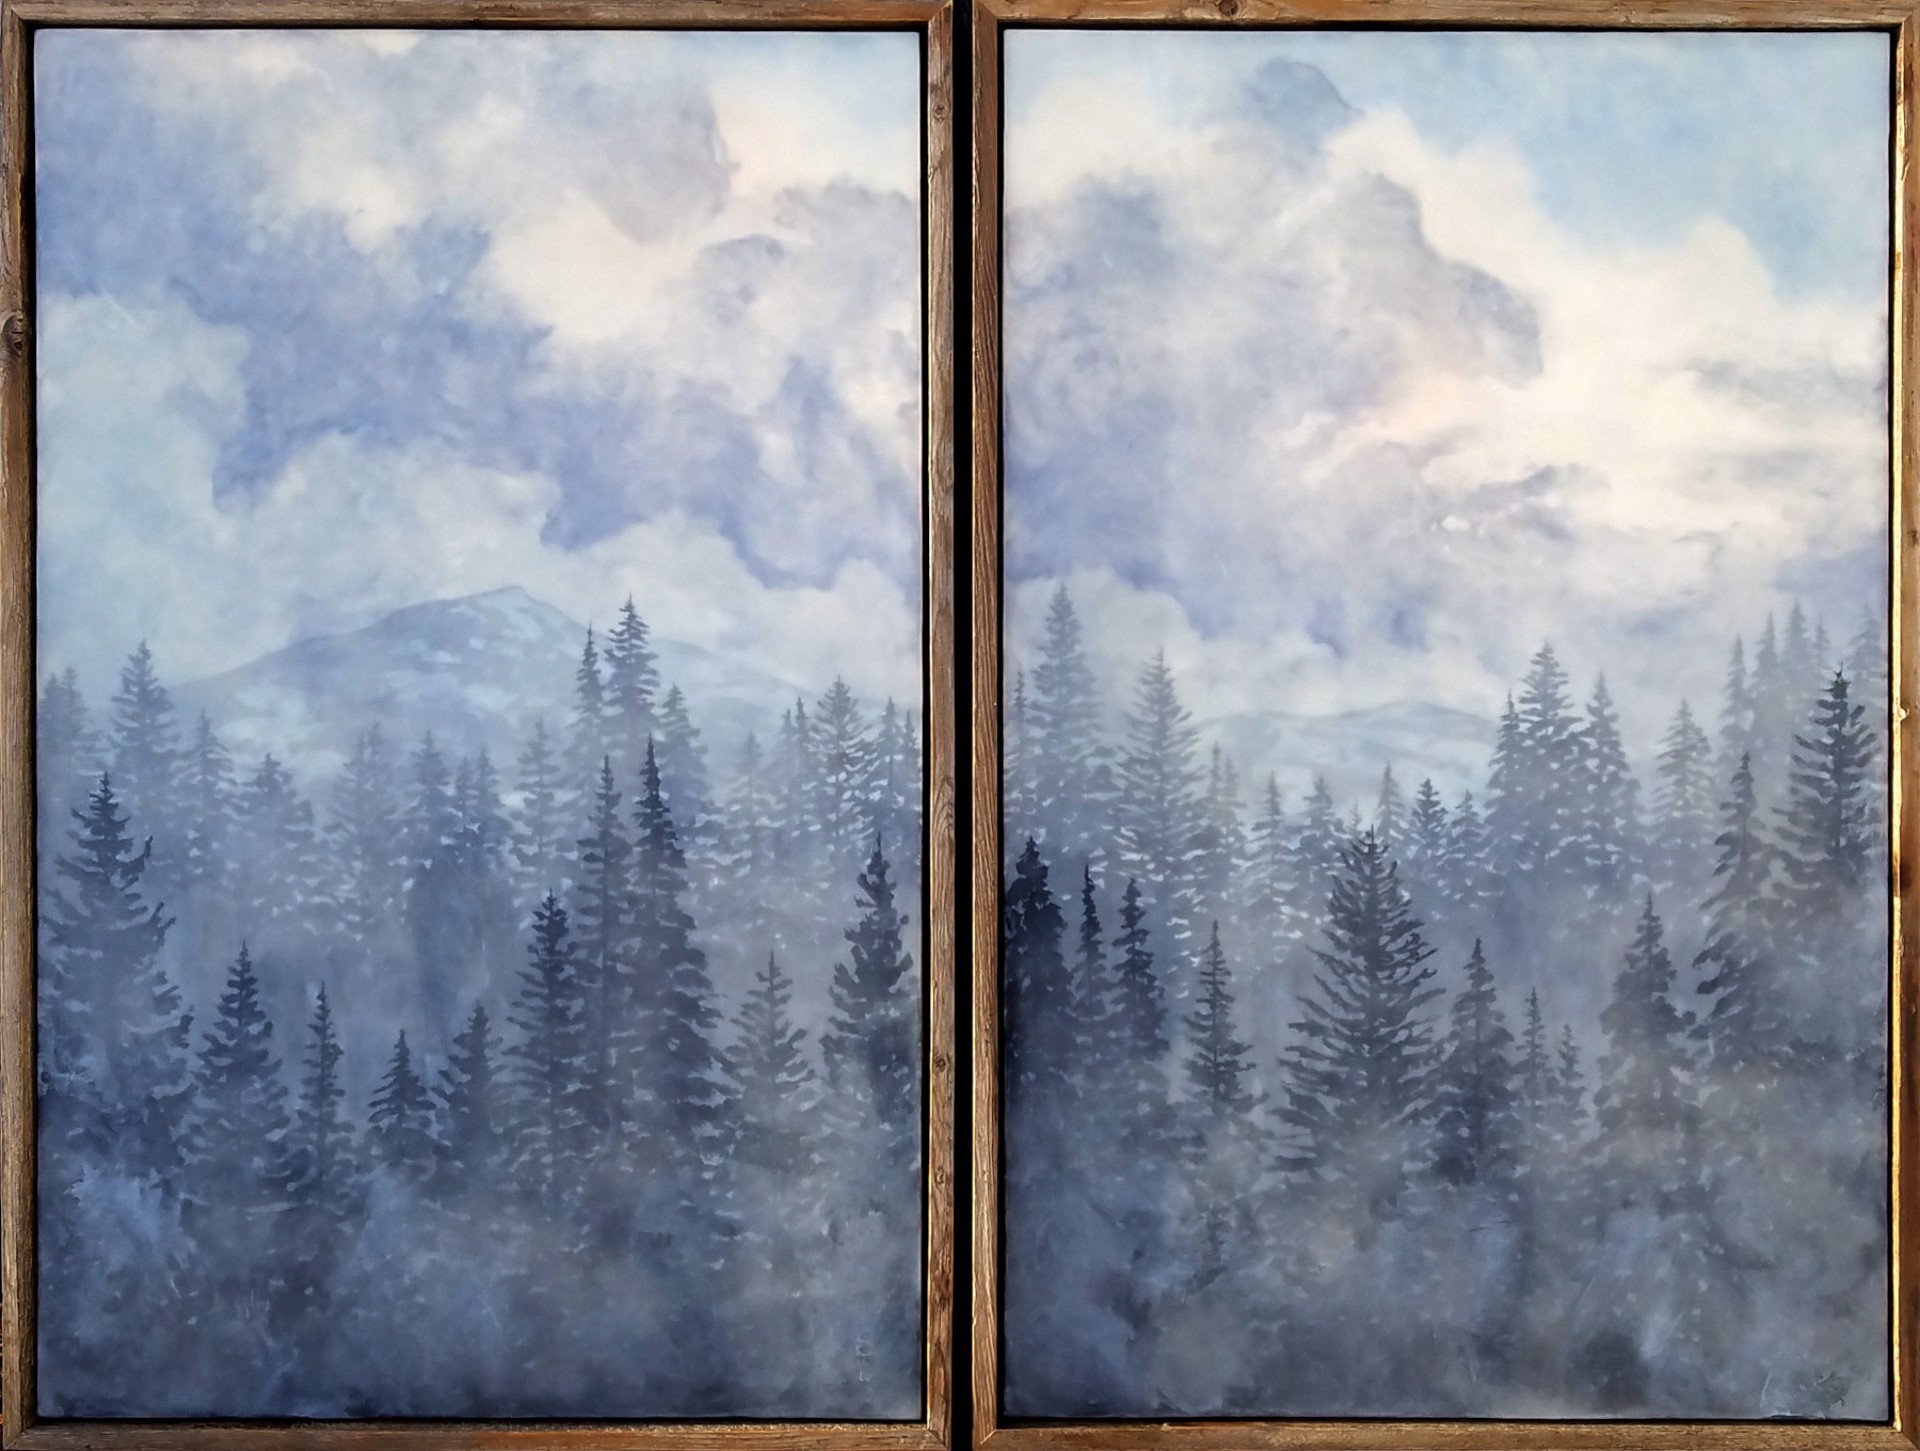 An Original Encaustic And Milk Paint Diptych Painting Of A Misty Treed Landscape With Blue Cloudy Sky Above Mountains And Layered Depth Of Trees, By Bridgette Meinhold